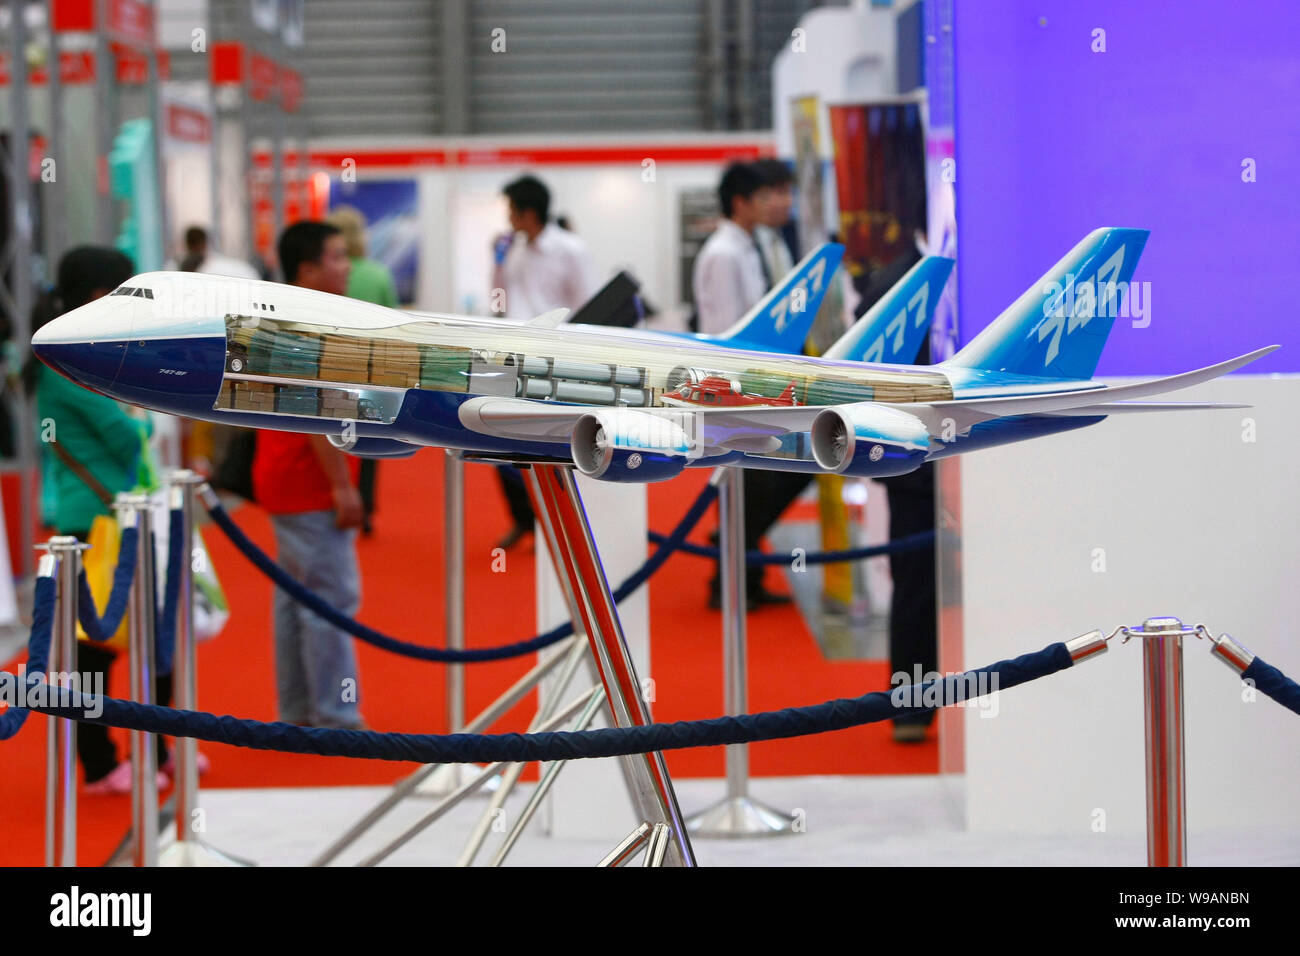 Models of cargo planes are on display at the stand of Boeing Cargo during the Transport Logistic China 2010 in Shanghai, China, June 10, 2010.   The T Stock Photo